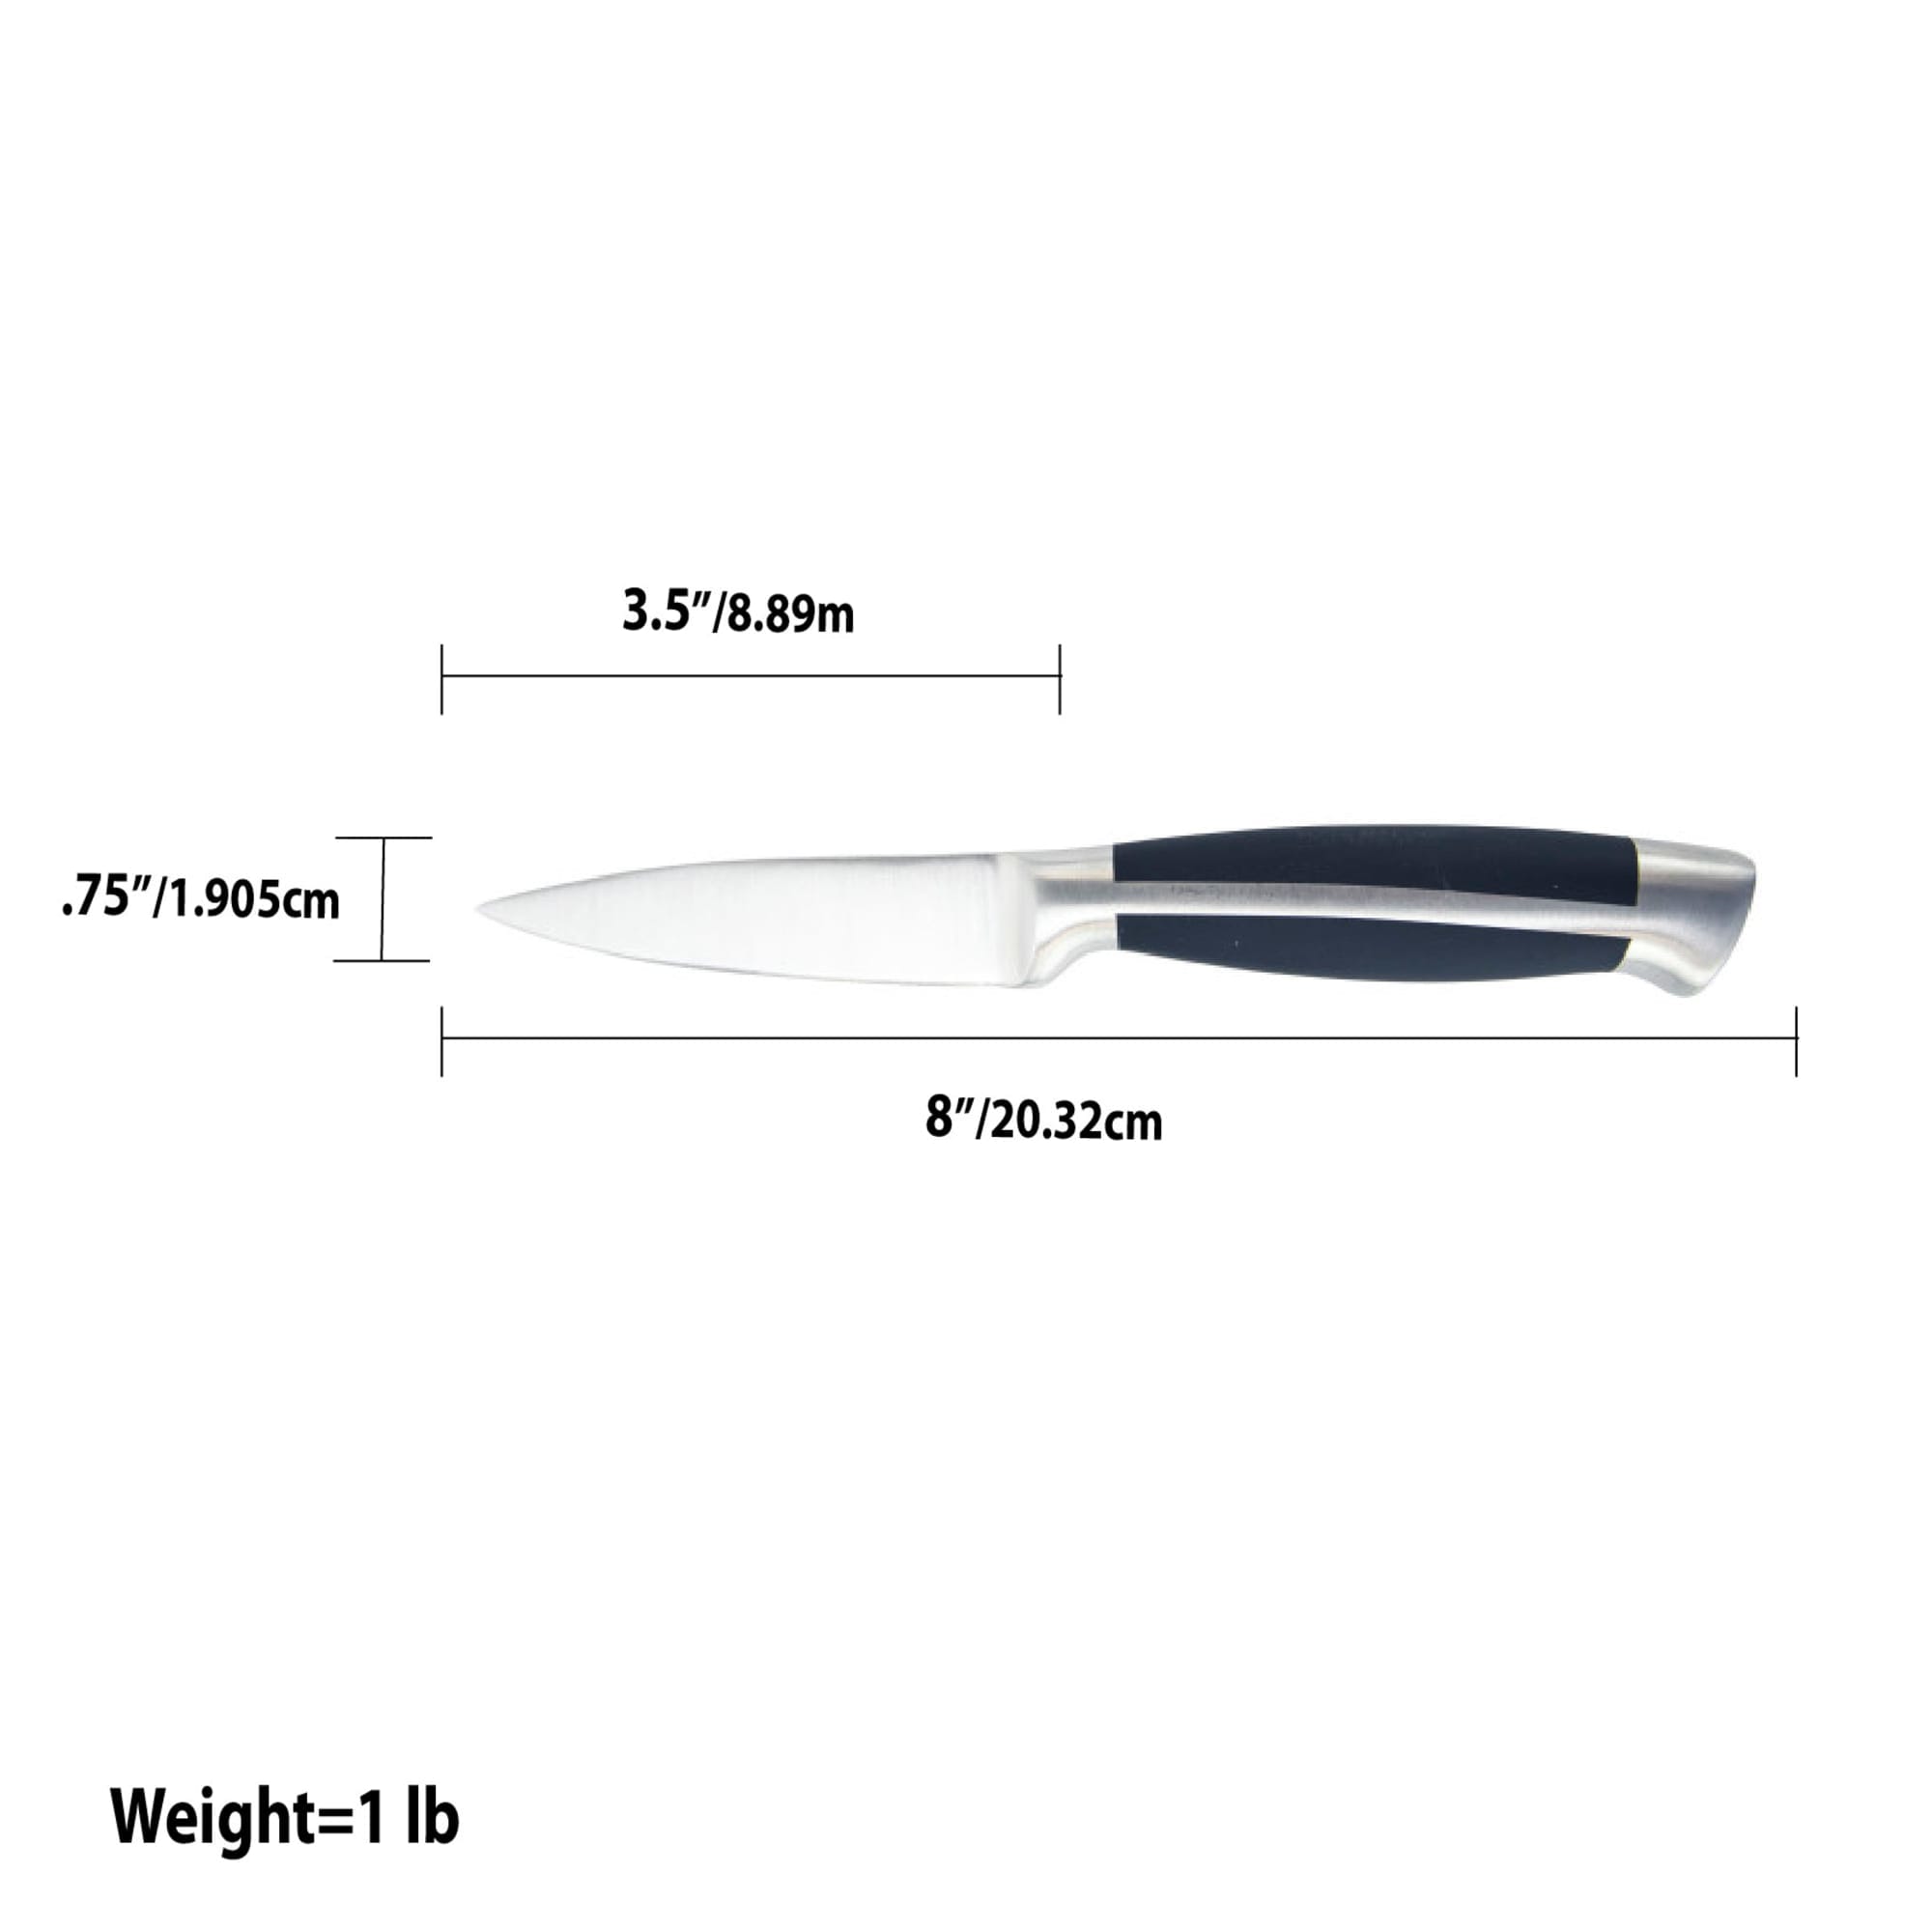 Home Basics Continental Collection 8" Paring Knife $3 EACH, CASE PACK OF 24